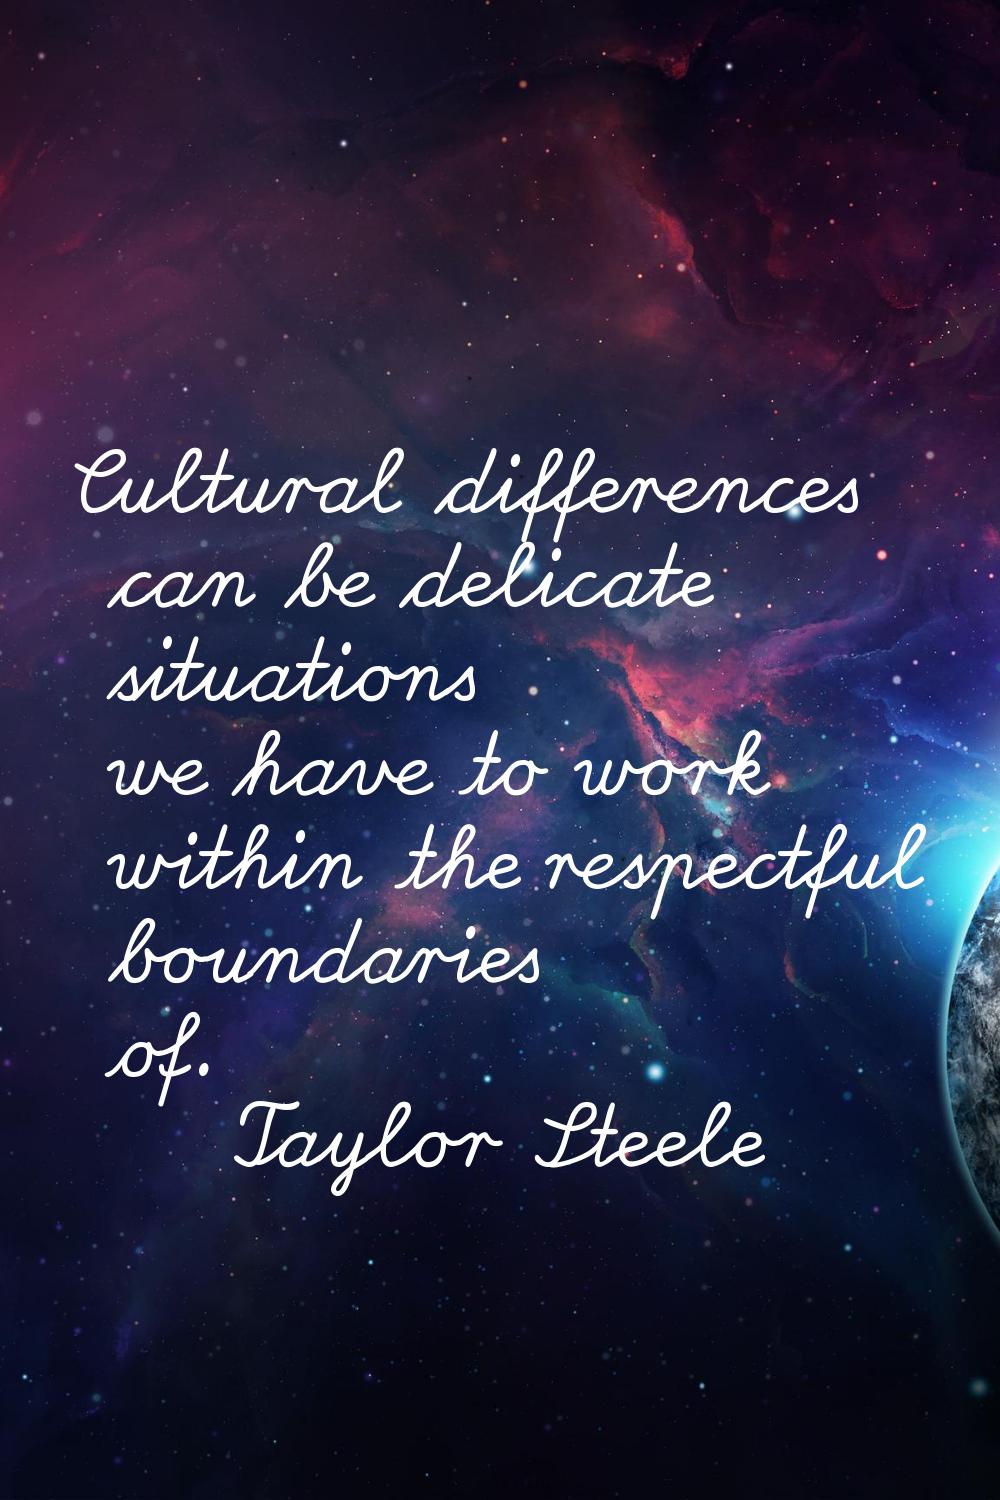 Cultural differences can be delicate situations we have to work within the respectful boundaries of